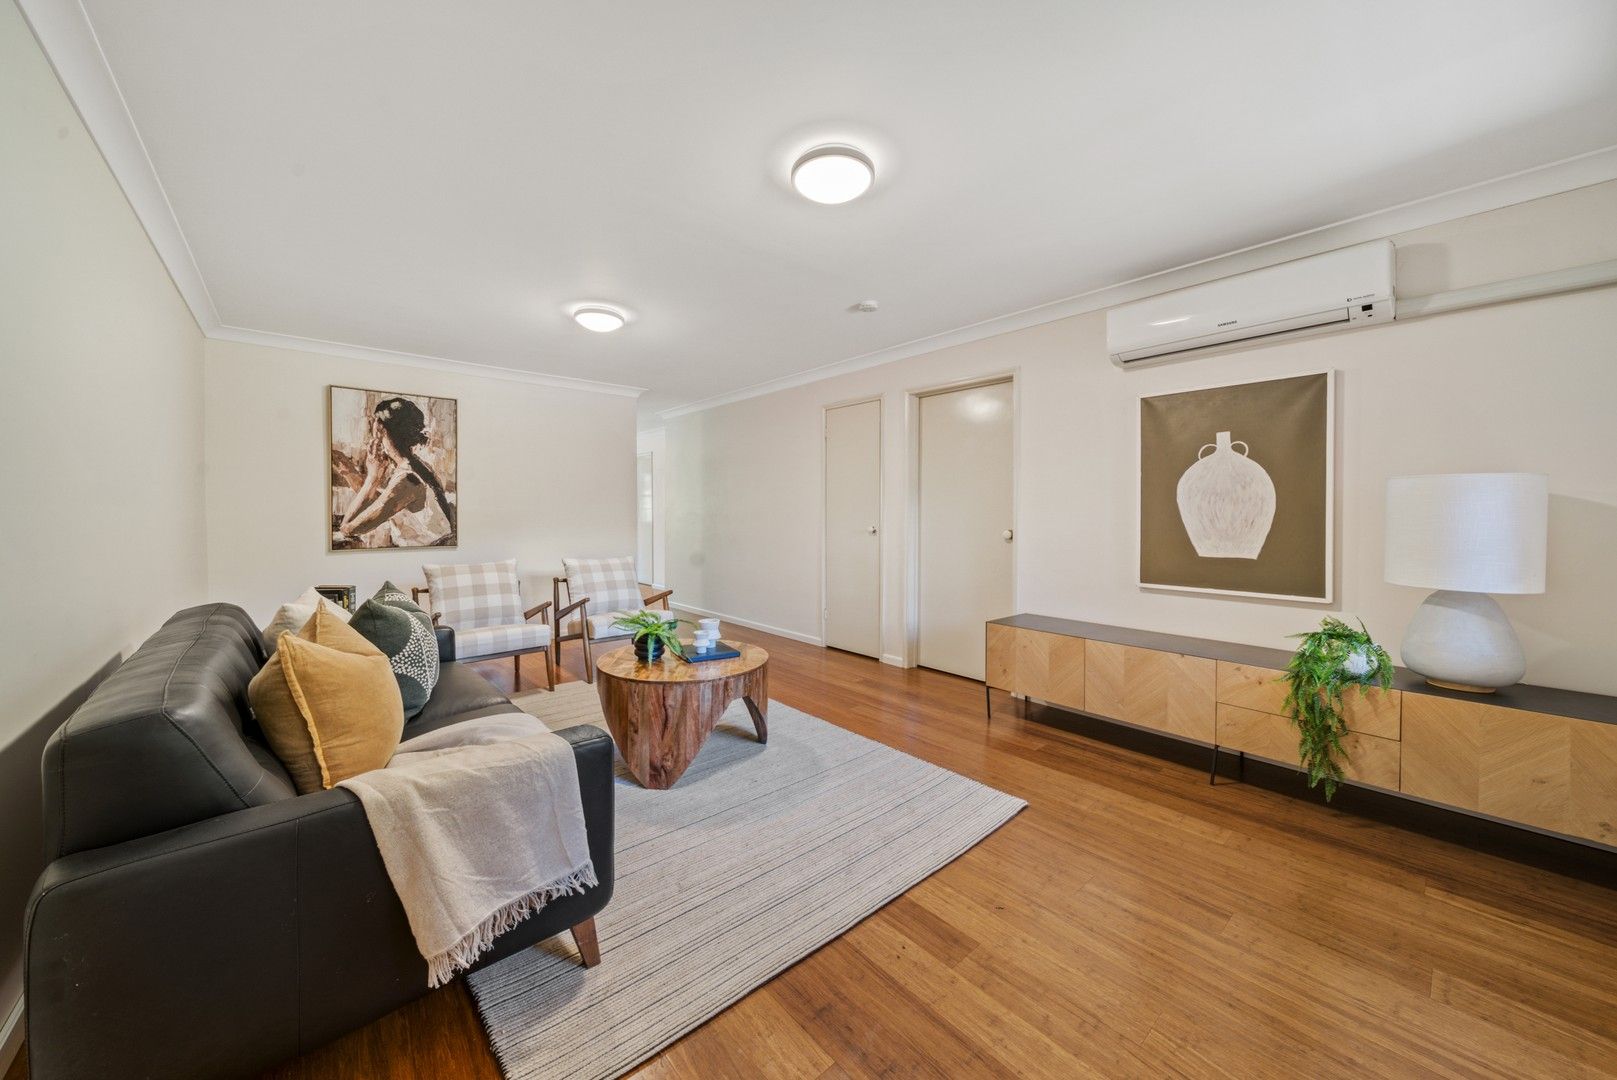 2 bedrooms Apartment / Unit / Flat in 15/1 Waddell Place CURTIN ACT, 2605